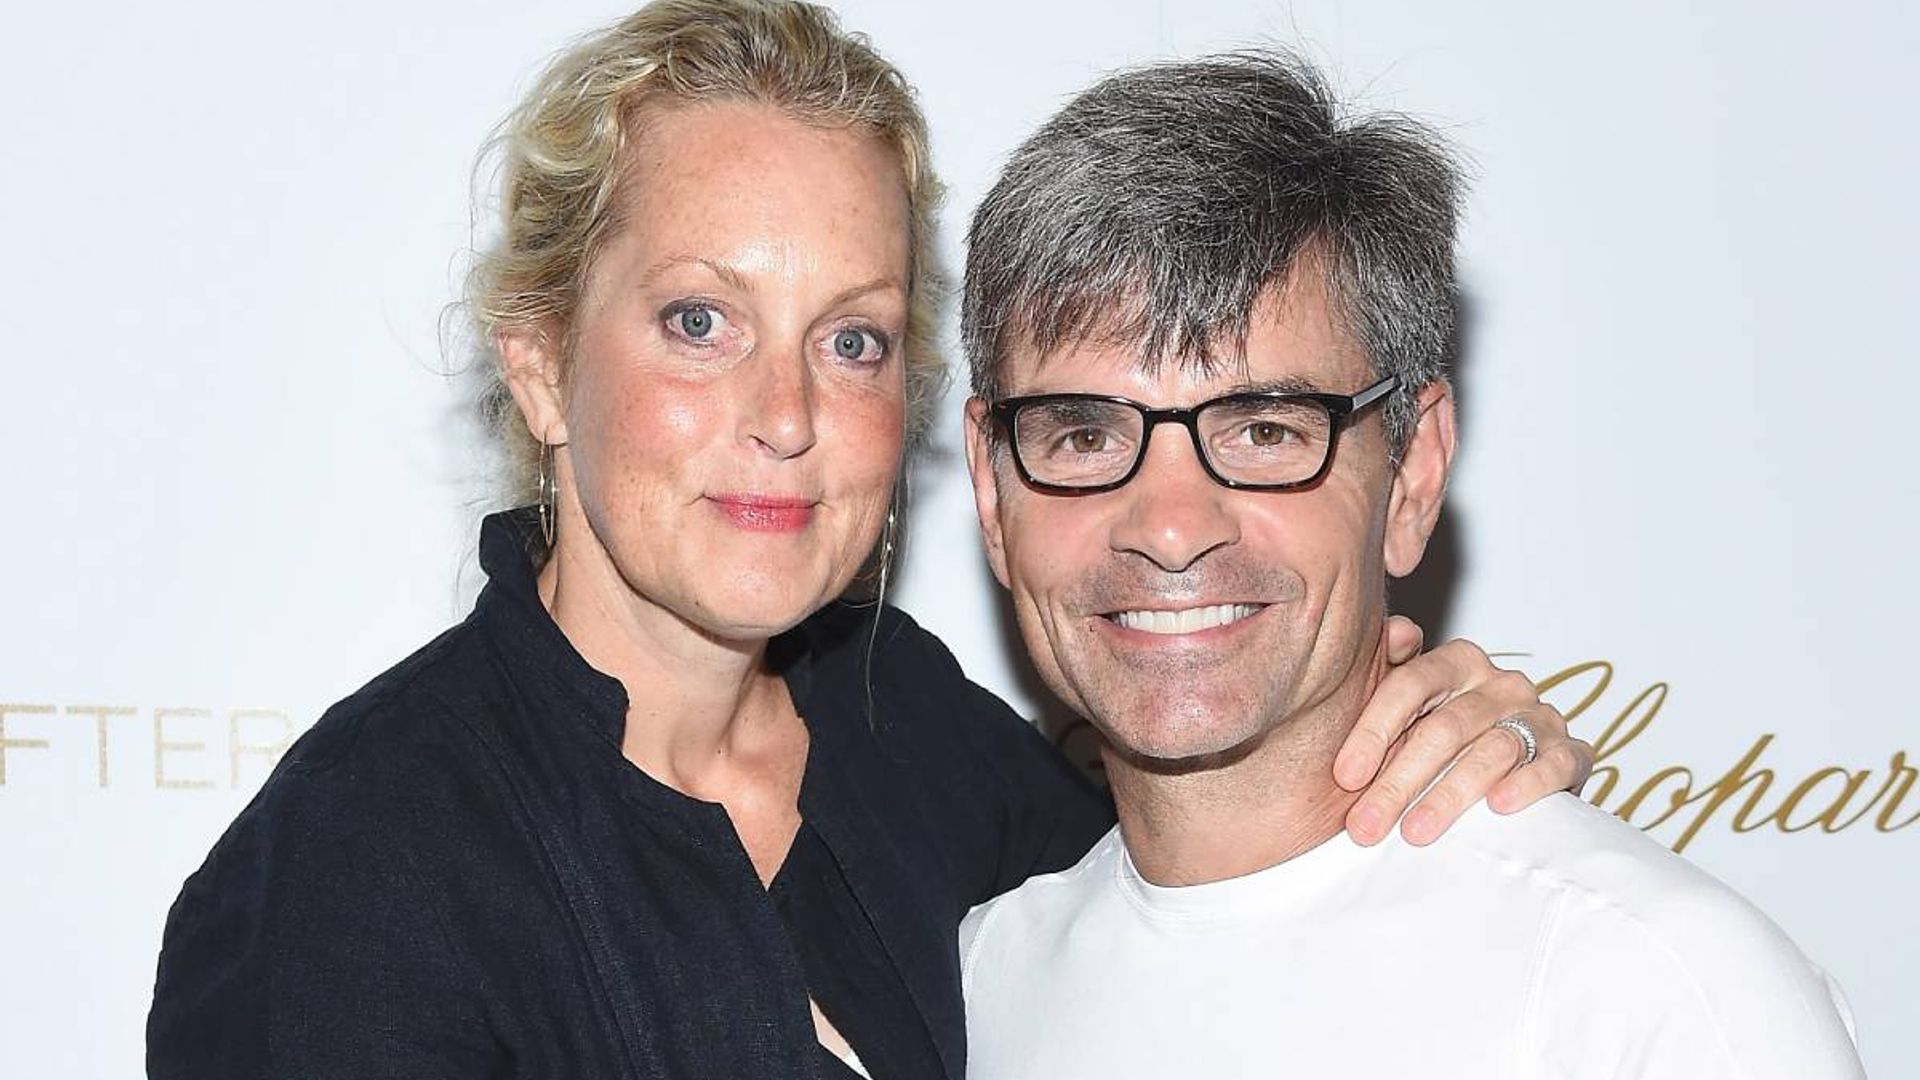 Ali Wentworth makes bold statement concerning husband George Stephanopoulos